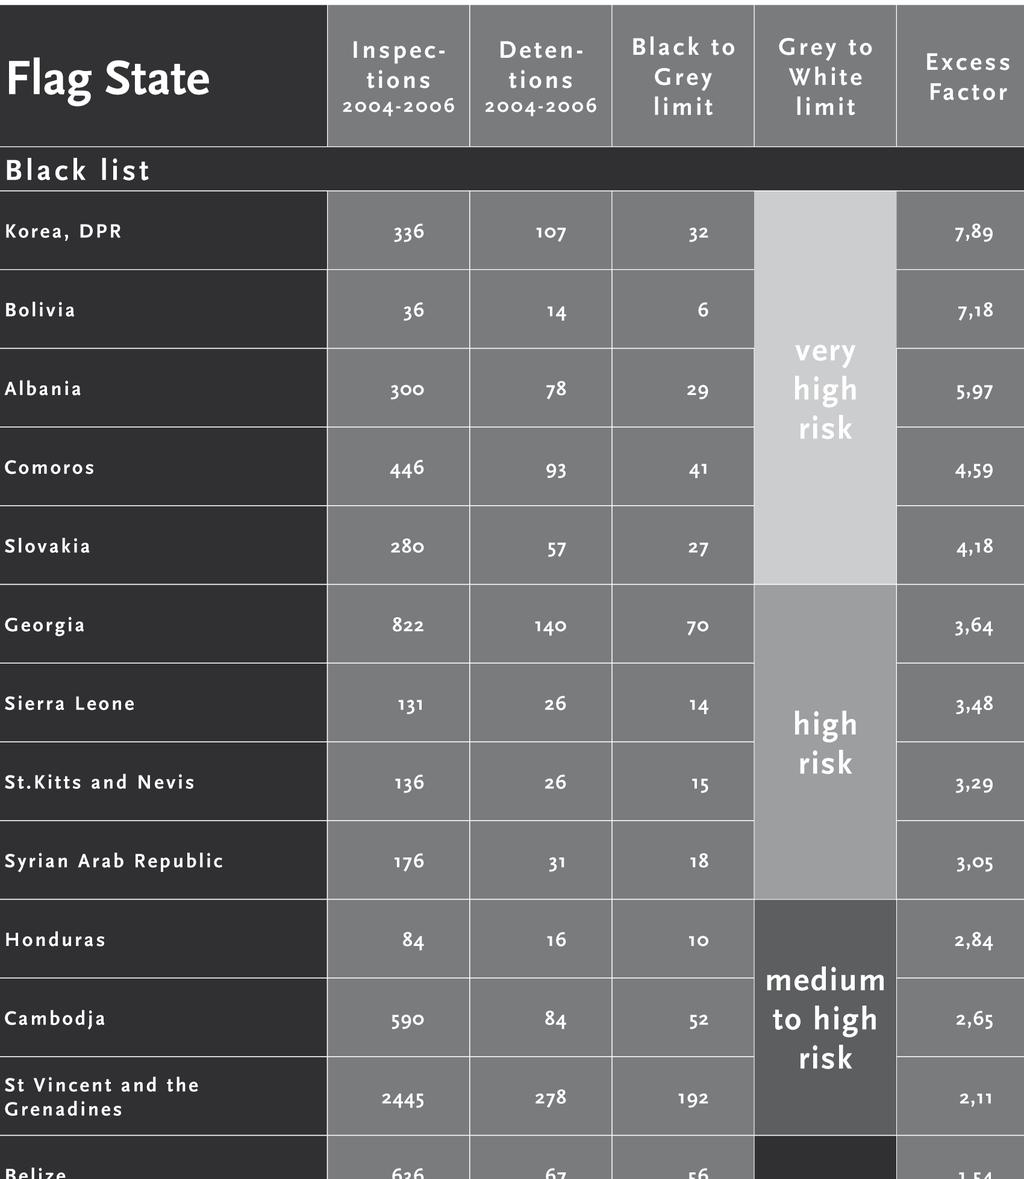 black list Flag State Inspections 2005-2007 Detentions 2005-2007 Black to Grey limit Grey to White limit Excess Factor Black list Korea, DPR 336 107 32 7,89 Bolivia 36 14 6 7,18 very high risk